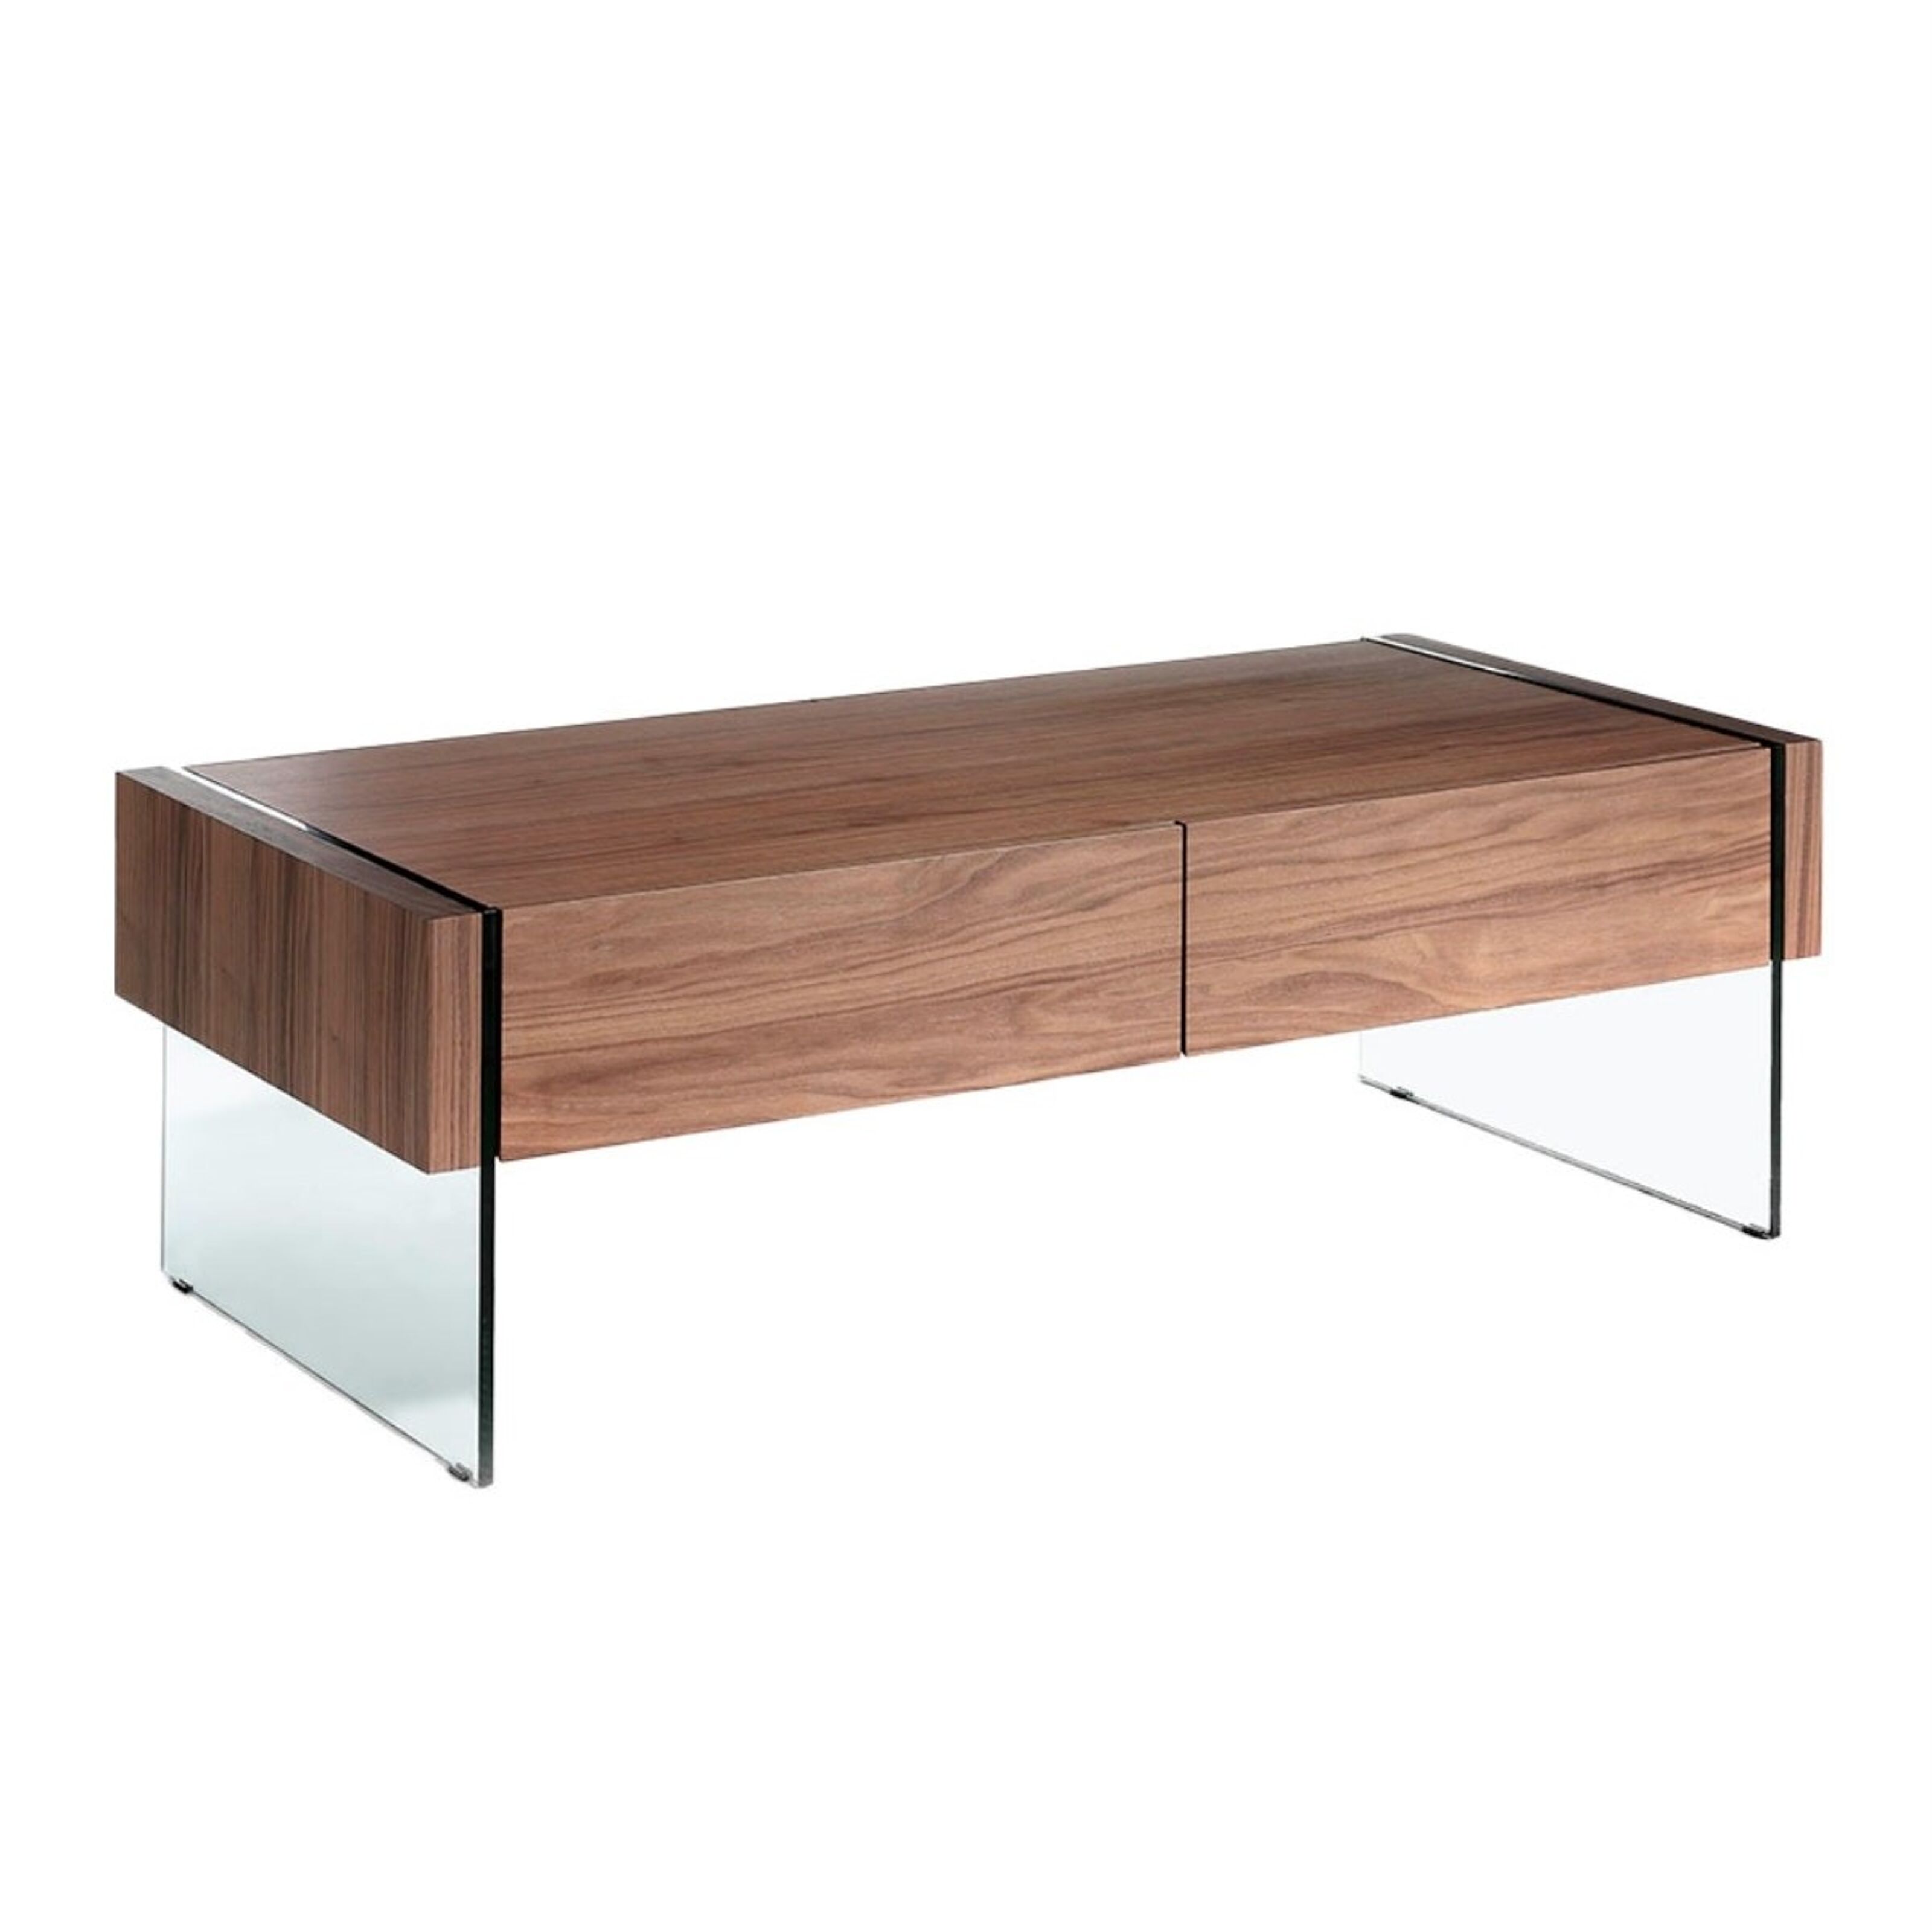 wholesale and veneered wood glass 2050 drawers, table sides Buy Walnut with center model tempered